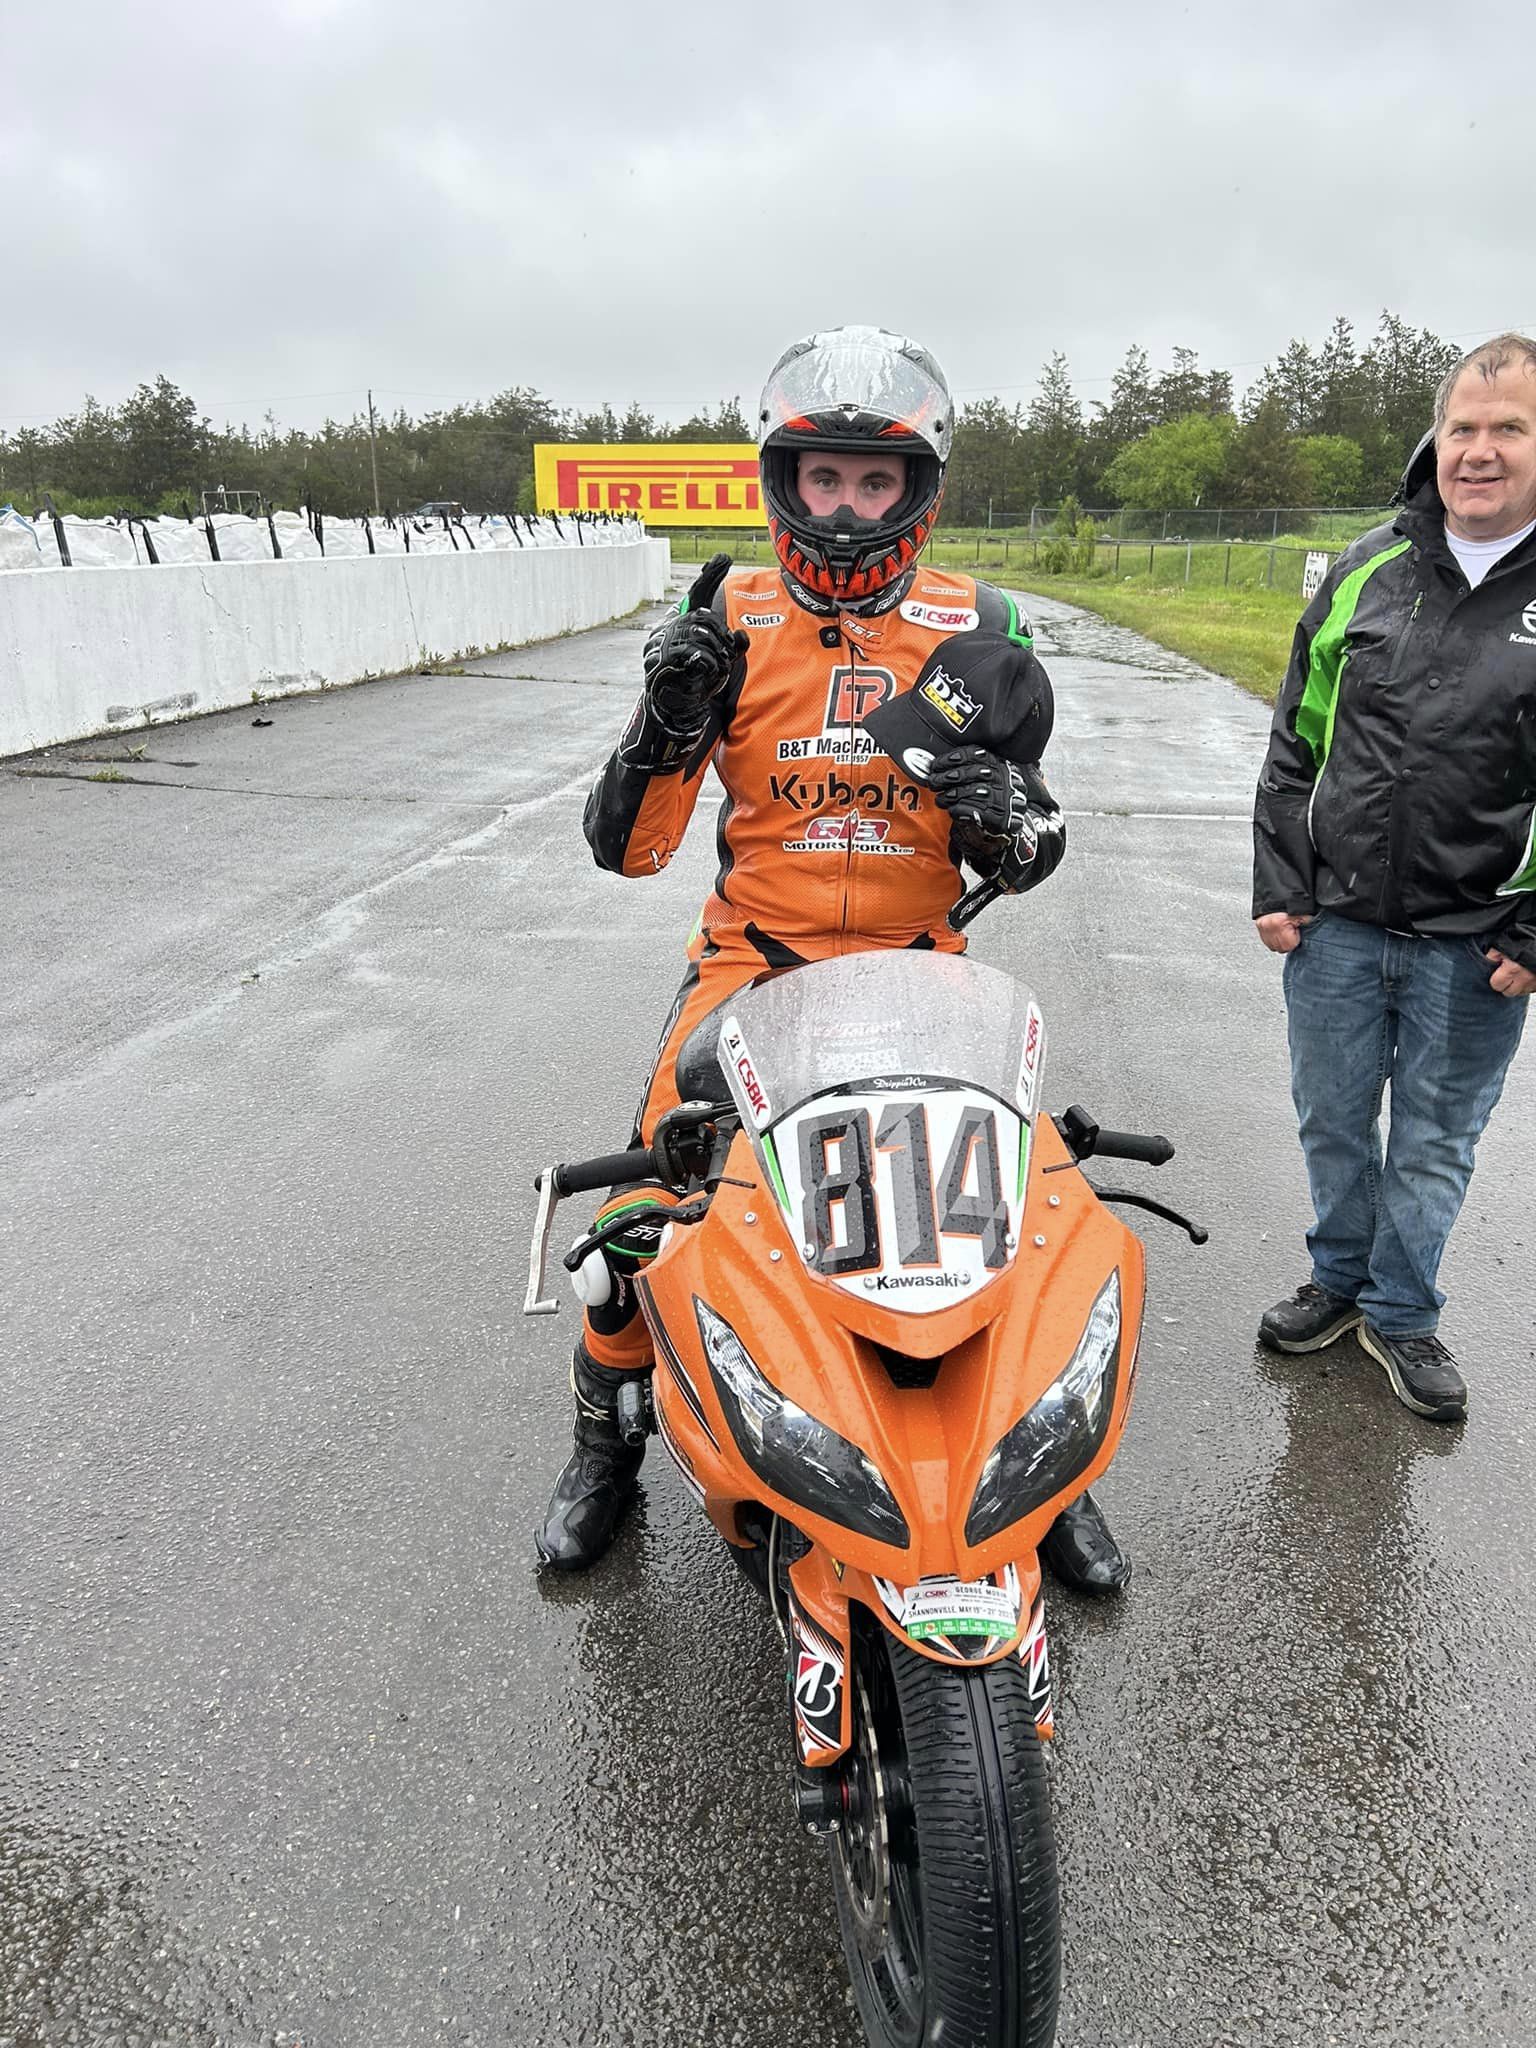 DP Brakes sponsored rider Connor Campbell on his 1st Place Sportbike finish of opening round Race 1 of the 2023 Bridgestone Canadian Superbike Championship